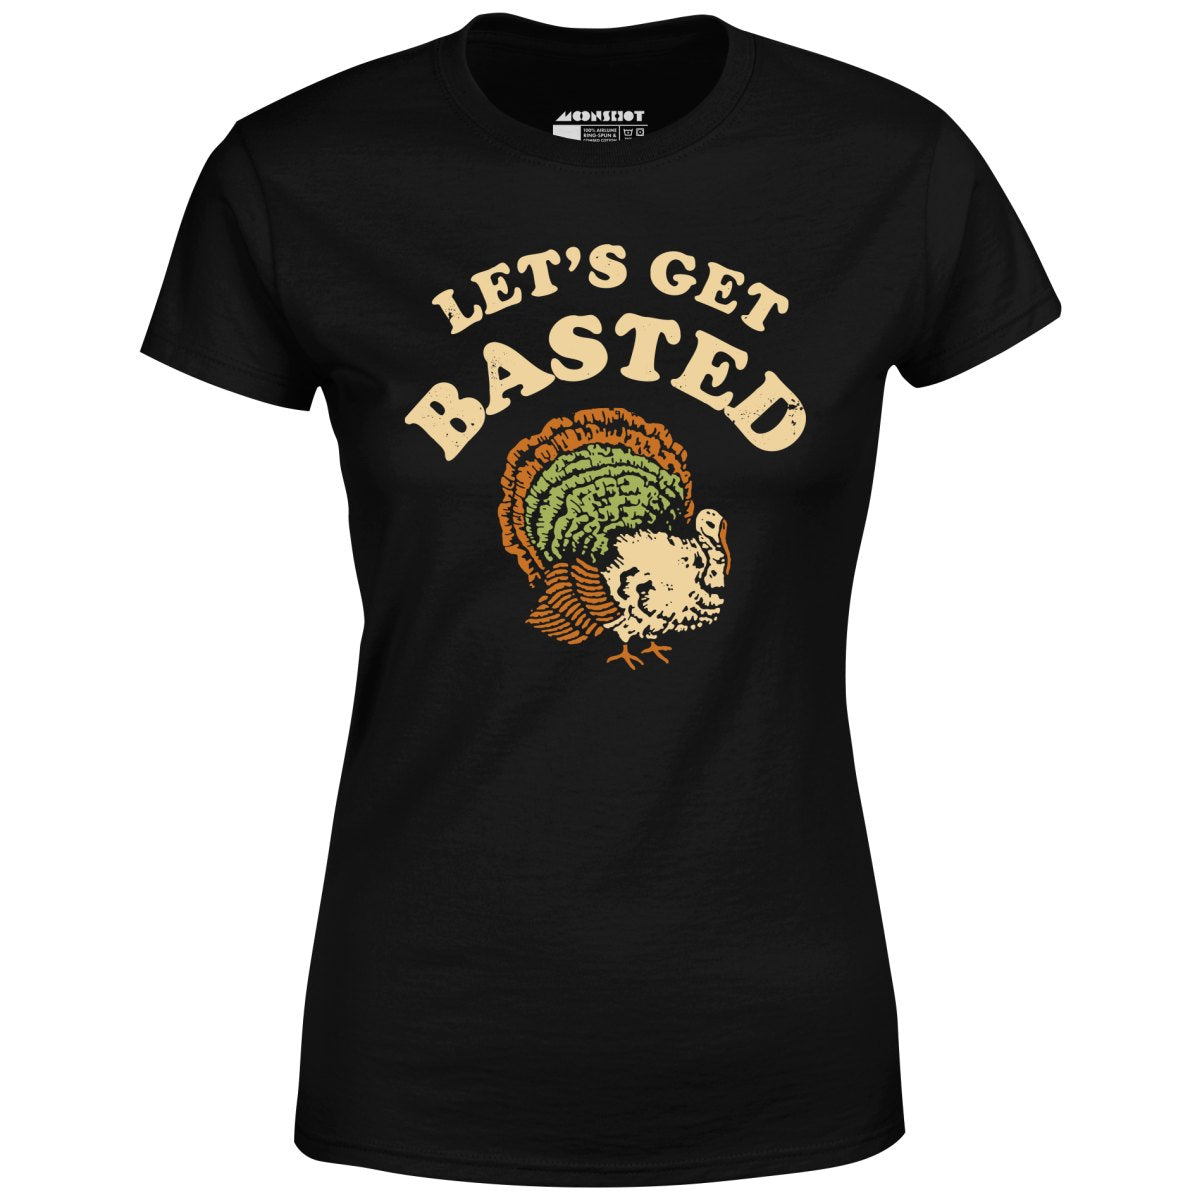 Let's Get Basted - Women's T-Shirt